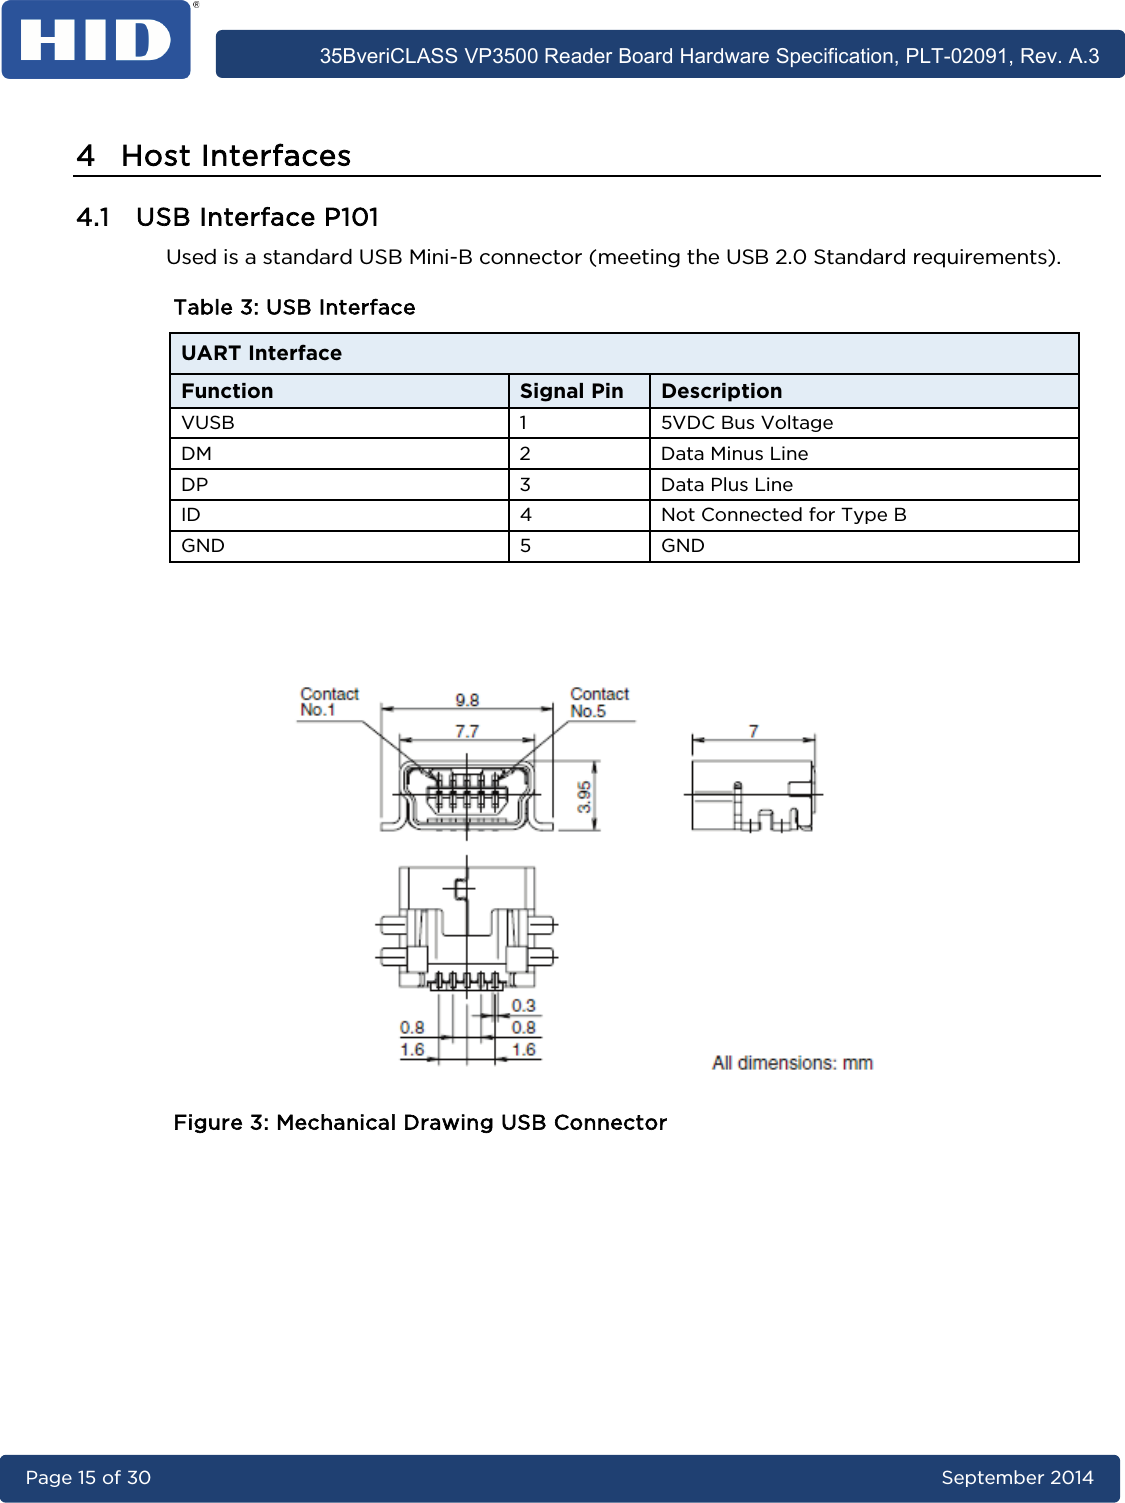      35BveriCLASS VP3500 Reader Board Hardware Specification, PLT-02091, Rev. A.3 Page 15 of 30   September 2014  4 Host Interfaces 4.1 USB Interface P101 Used is a standard USB Mini-B connector (meeting the USB 2.0 Standard requirements). Table 3: USB Interface UART Interface Function Signal Pin Description VUSB  1  5VDC Bus Voltage DM  2  Data Minus Line DP  3  Data Plus Line ID  4  Not Connected for Type B GND  5  GND     Figure 3: Mechanical Drawing USB Connector      